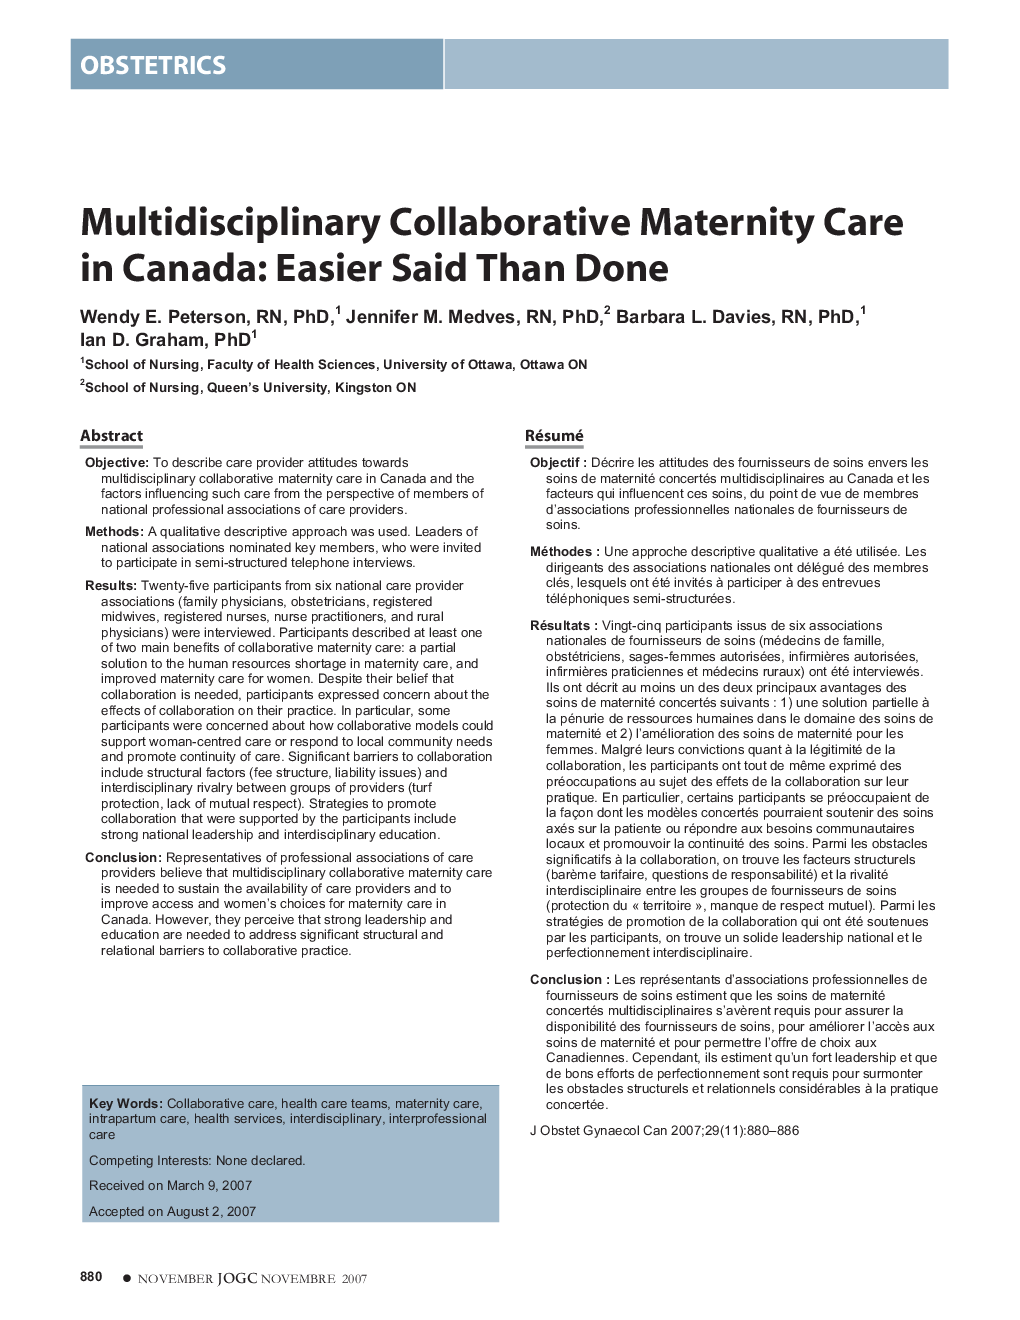 Multidisciplinary Collaborative Maternity Care in Canada: Easier Said Than Done